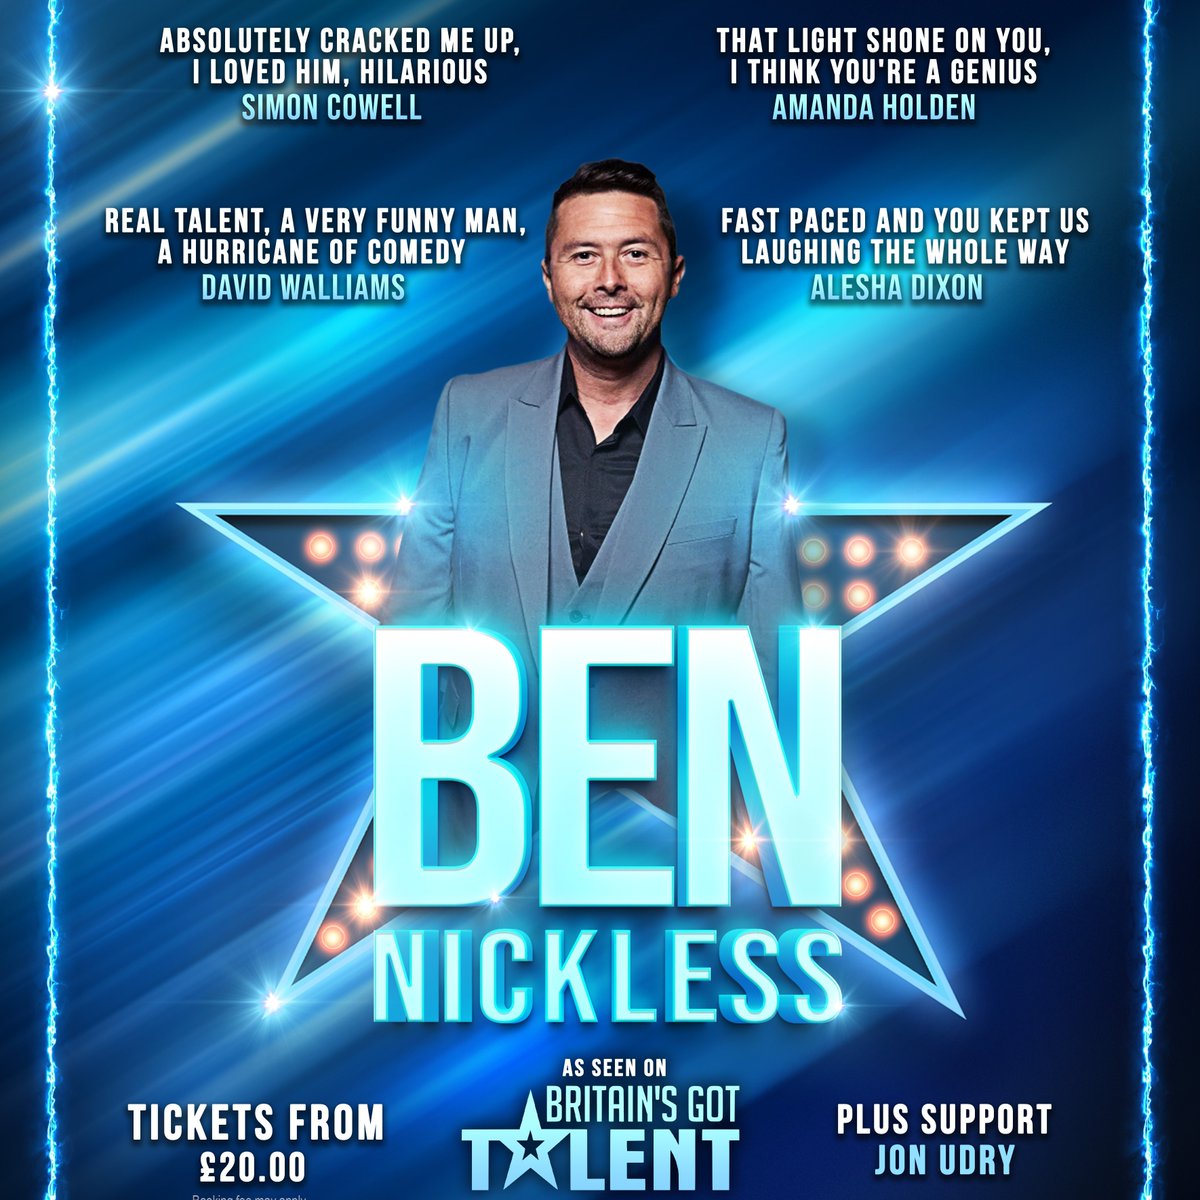 🌟𝗢𝗡 𝗦𝗔𝗟𝗘 𝗡𝗢𝗪!🌟 Join Britain's Got Talent finalist 𝗕𝗘𝗡 𝗡𝗜𝗖𝗞𝗟𝗘𝗦𝗦 as he returns to Shrewsbury for an evening of hilarious comedy and uncanny vocal impressions. With support from Jon Udry. 🗓️ Fri 10 May 2024 | Book Tickets: orlo.uk/cxild